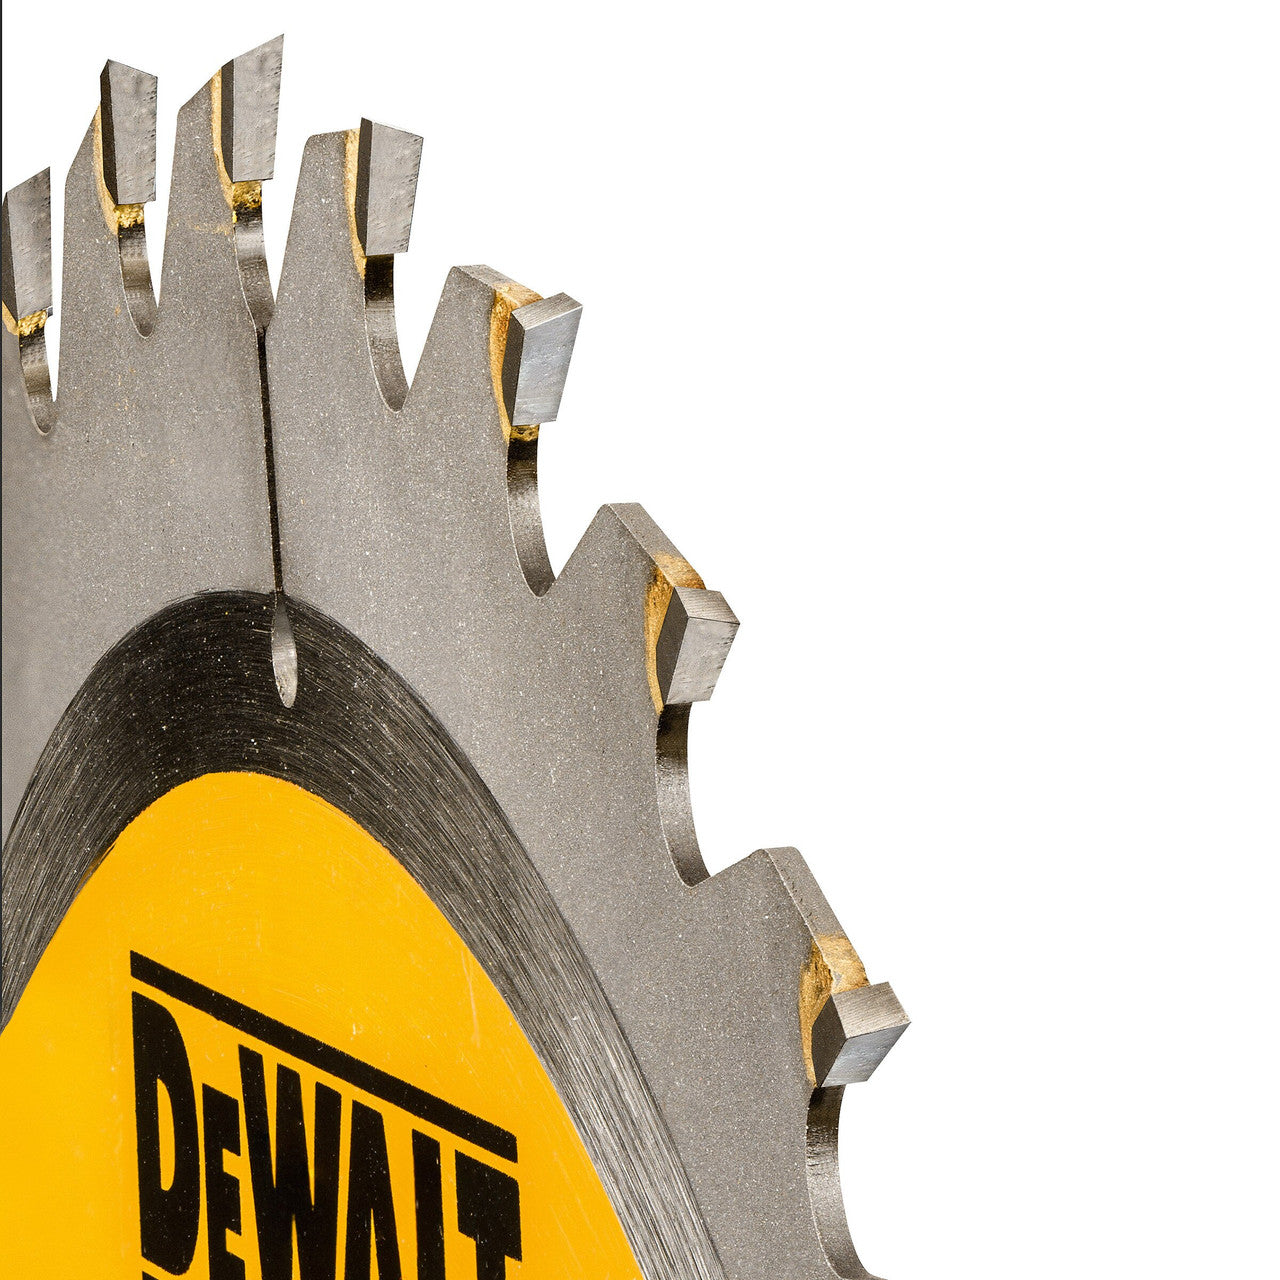 Dewalt DT40271 Extreme Runtime Circular Saw Blade for DCS577 190mm x 36T